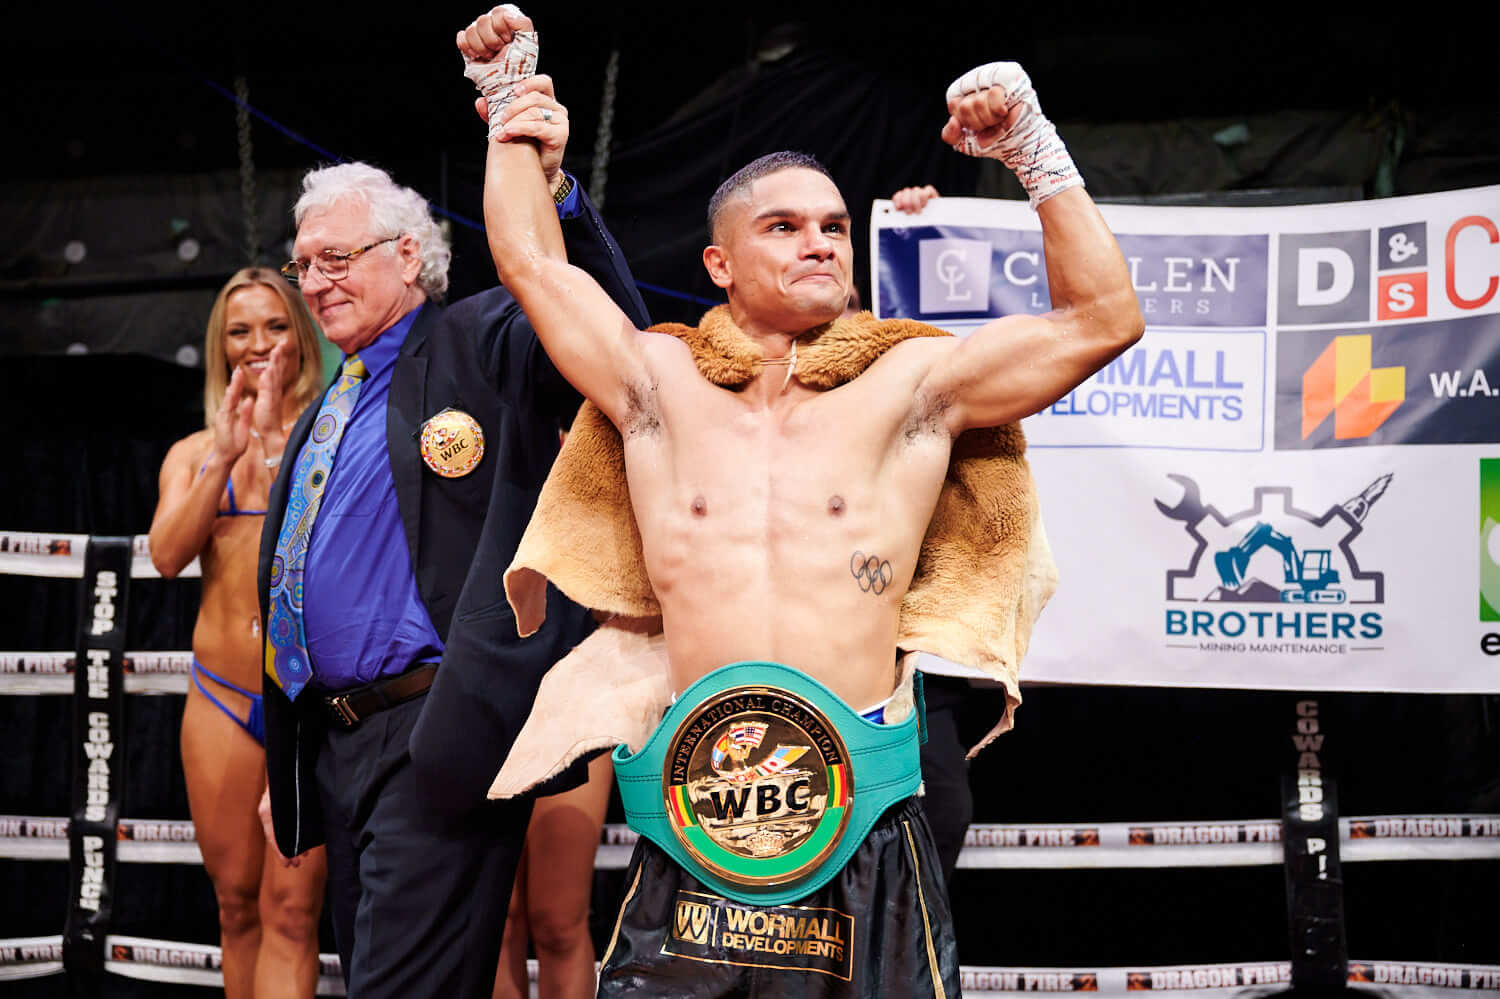 EXCLUSIVE: Alex Winwood - Attacking 108 and 105lbs to smash Jeff Fenech's world title record